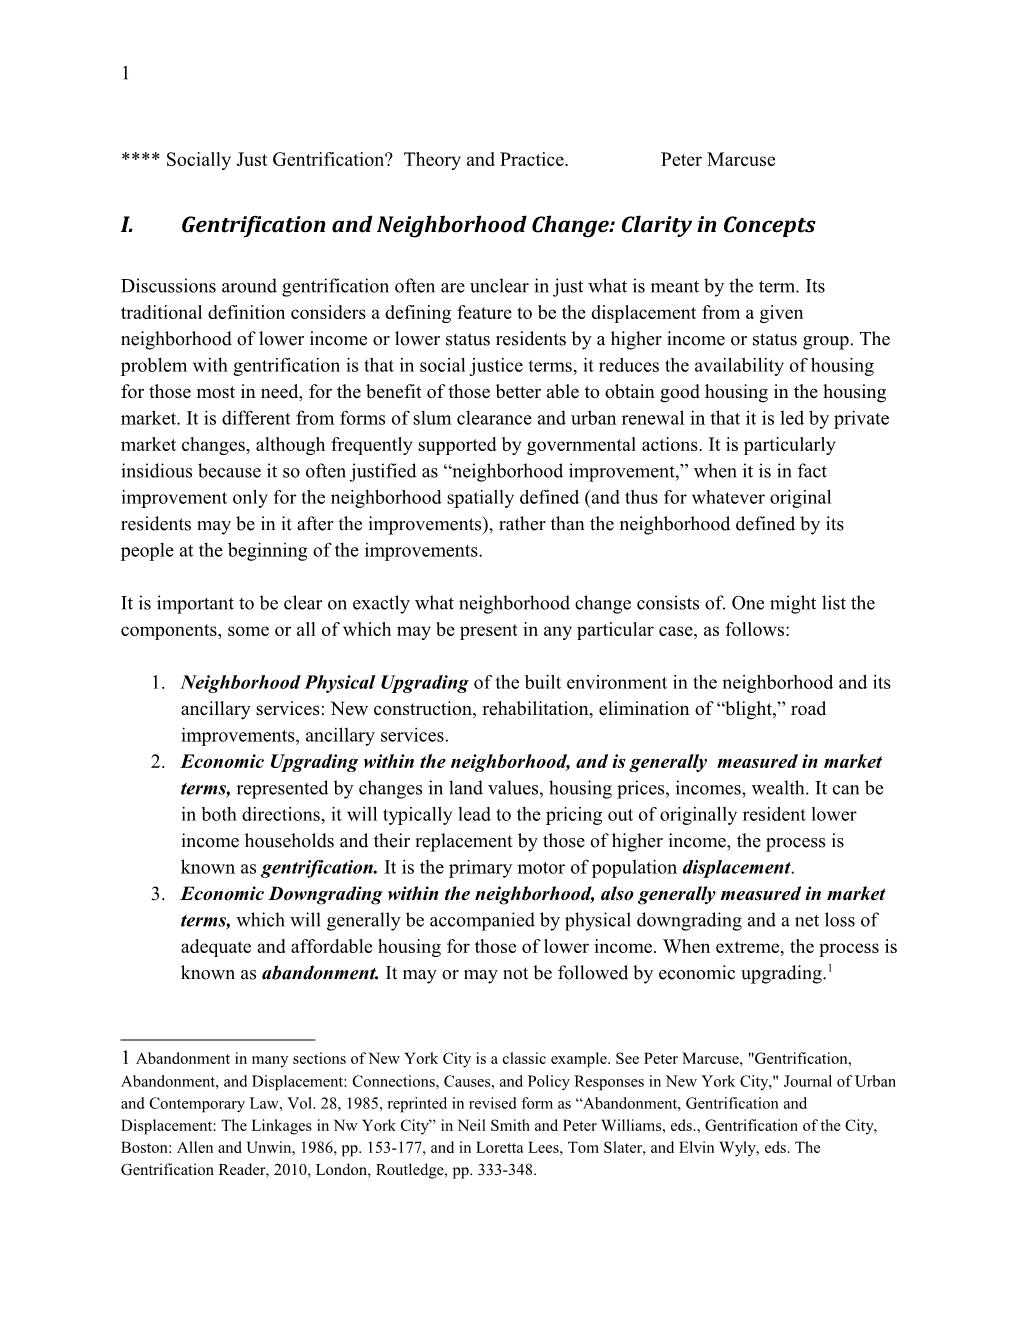 I.Gentrification and Neighborhood Change:Clarity in Concepts